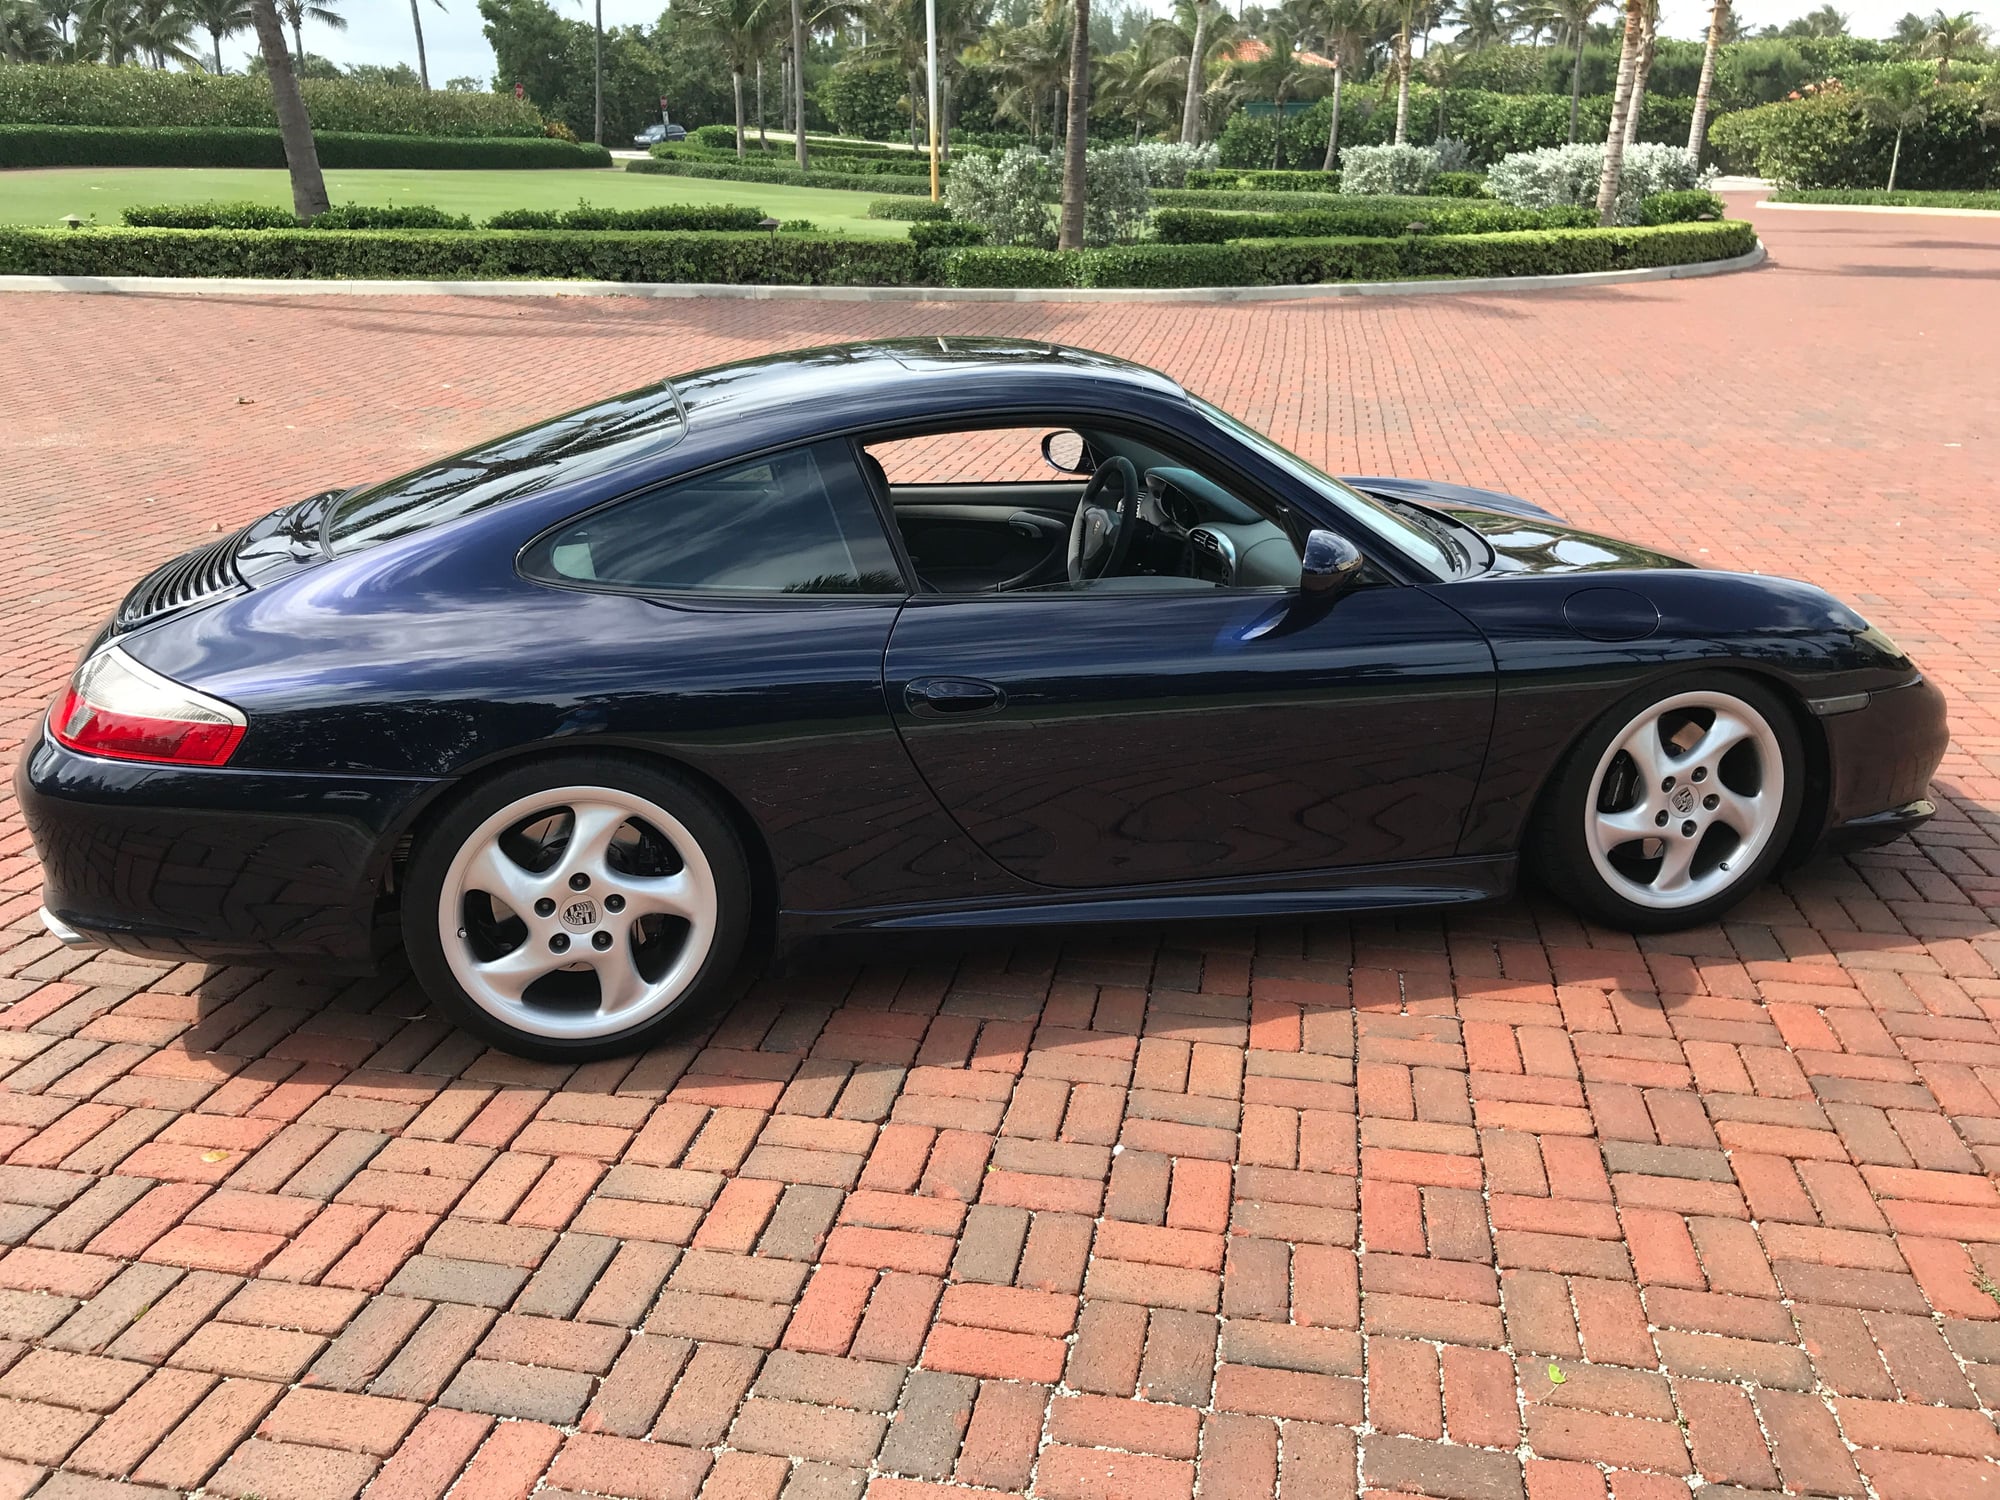 2003 Porsche 911 - 2 Owner 2003 Carerra Coupe - Used - VIN WPOAA29913S621237 - 100,240 Miles - 6 cyl - 2WD - Manual - Coupe - Blue - Boynton Beach, FL 33437, United States